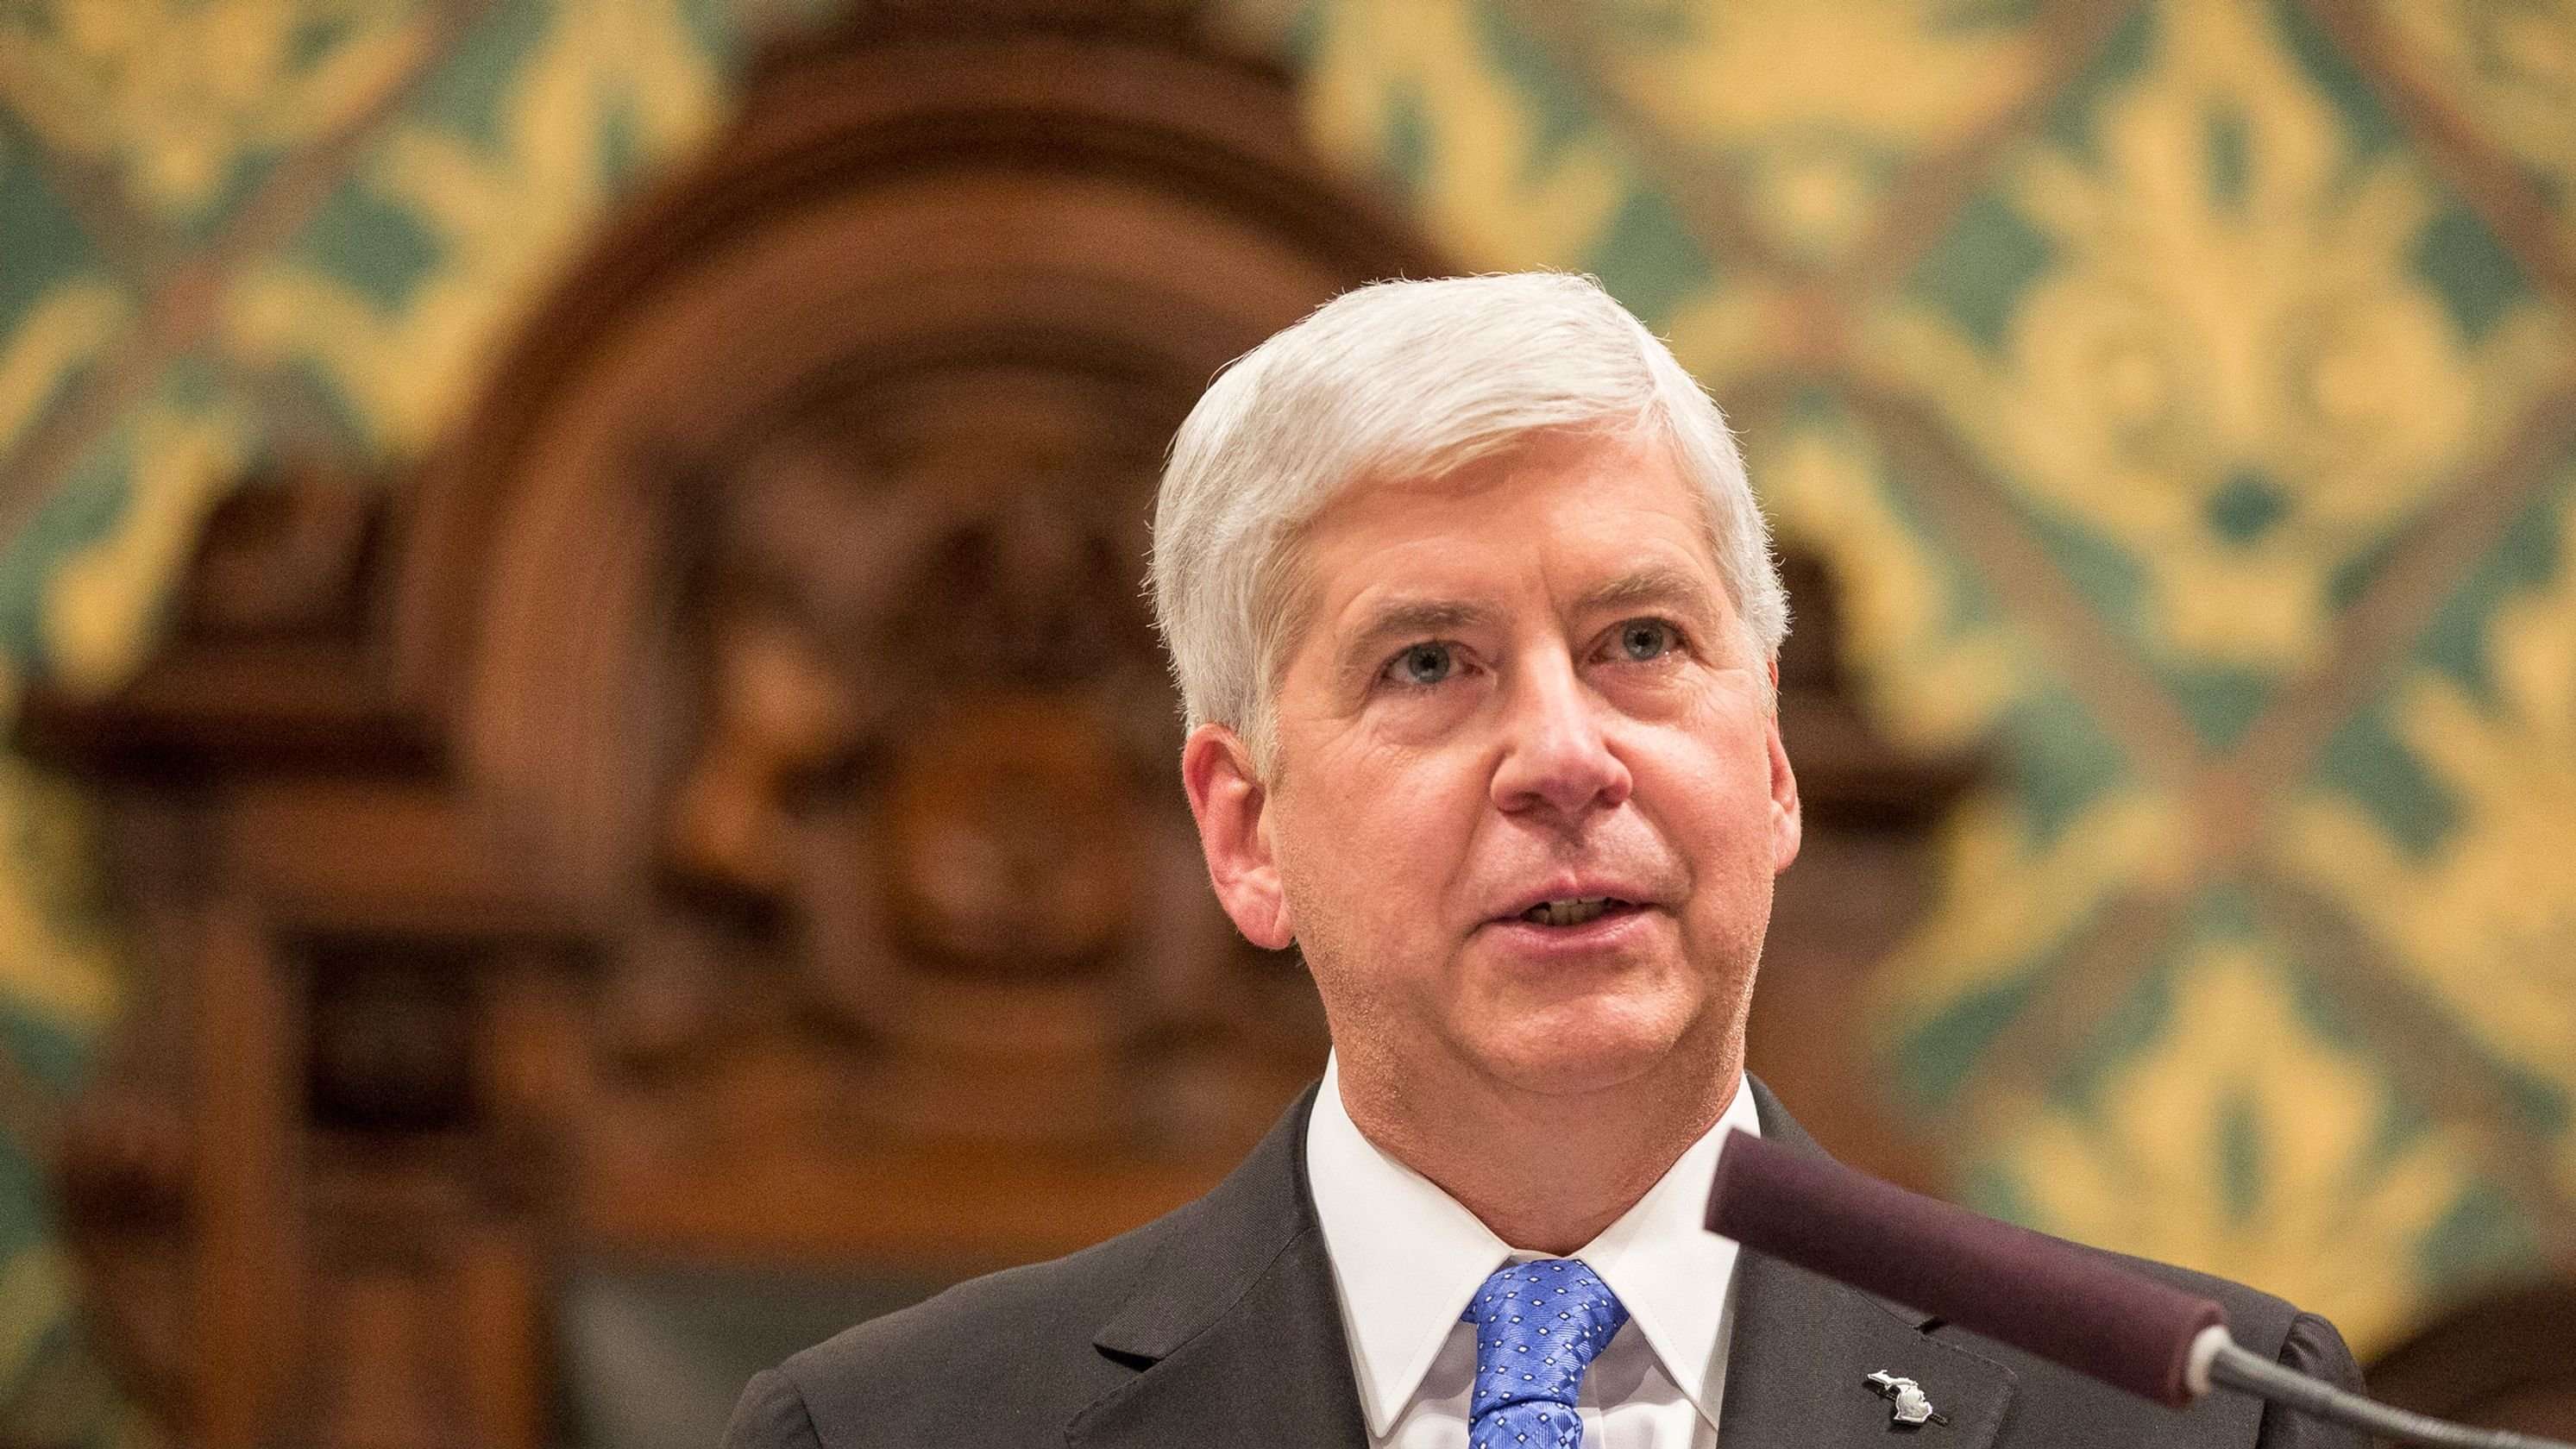 image for Flint residents can sue former Gov. Snyder over water disaster, judge rules